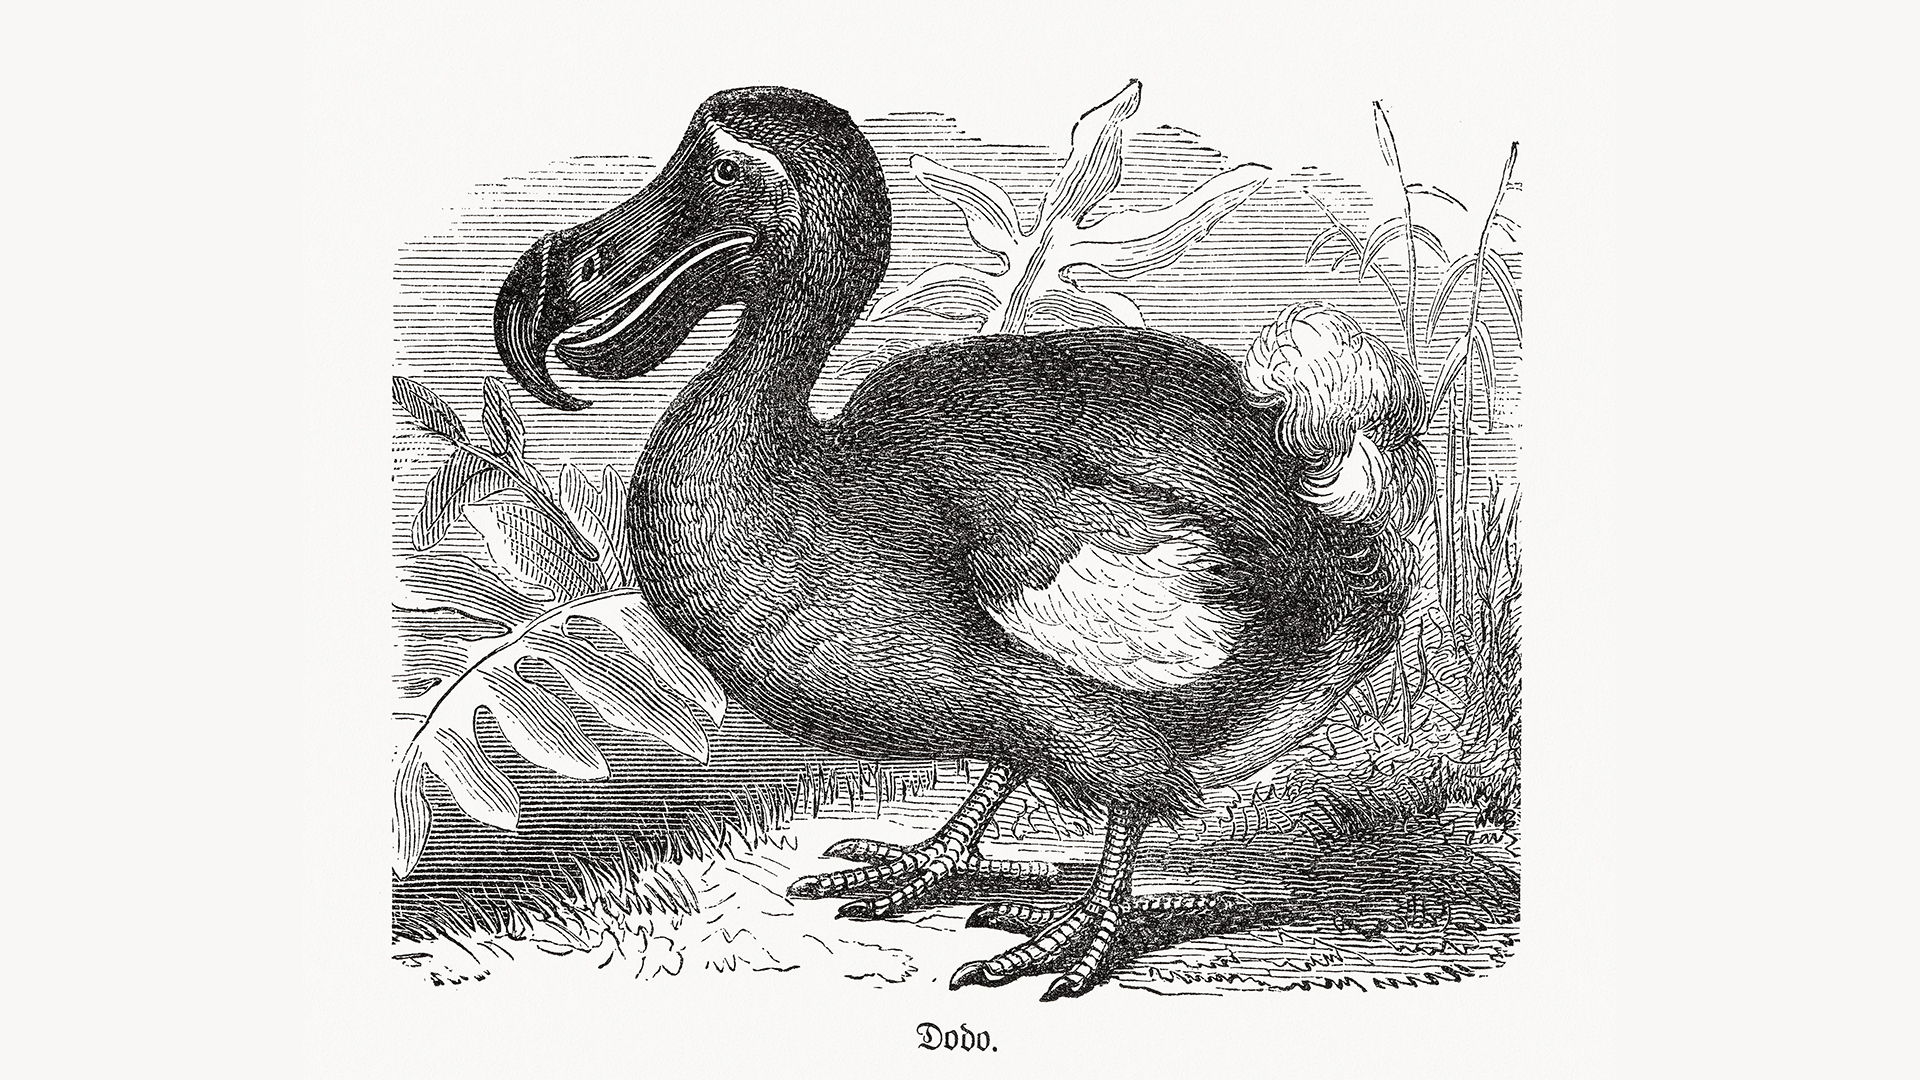 Artistic representations of dodos historically represented the birds as rotund, slow and clumsy, but recent research hints otherwise.